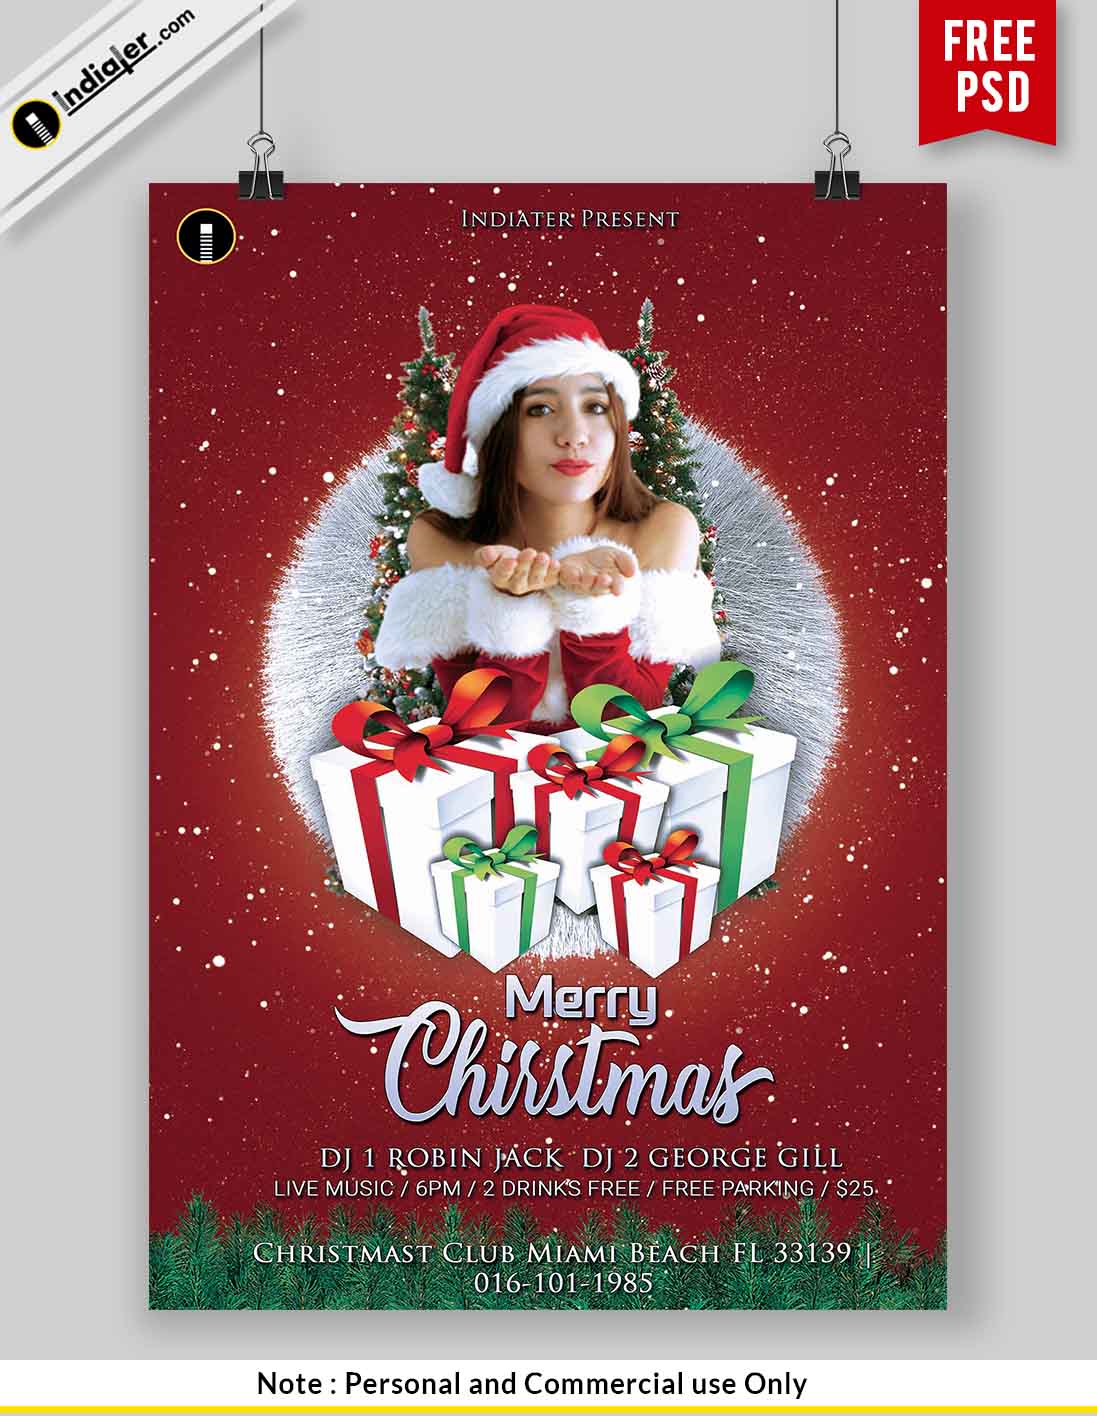 Download Free Christmas Flyer PSD Templates for Print - Indiater